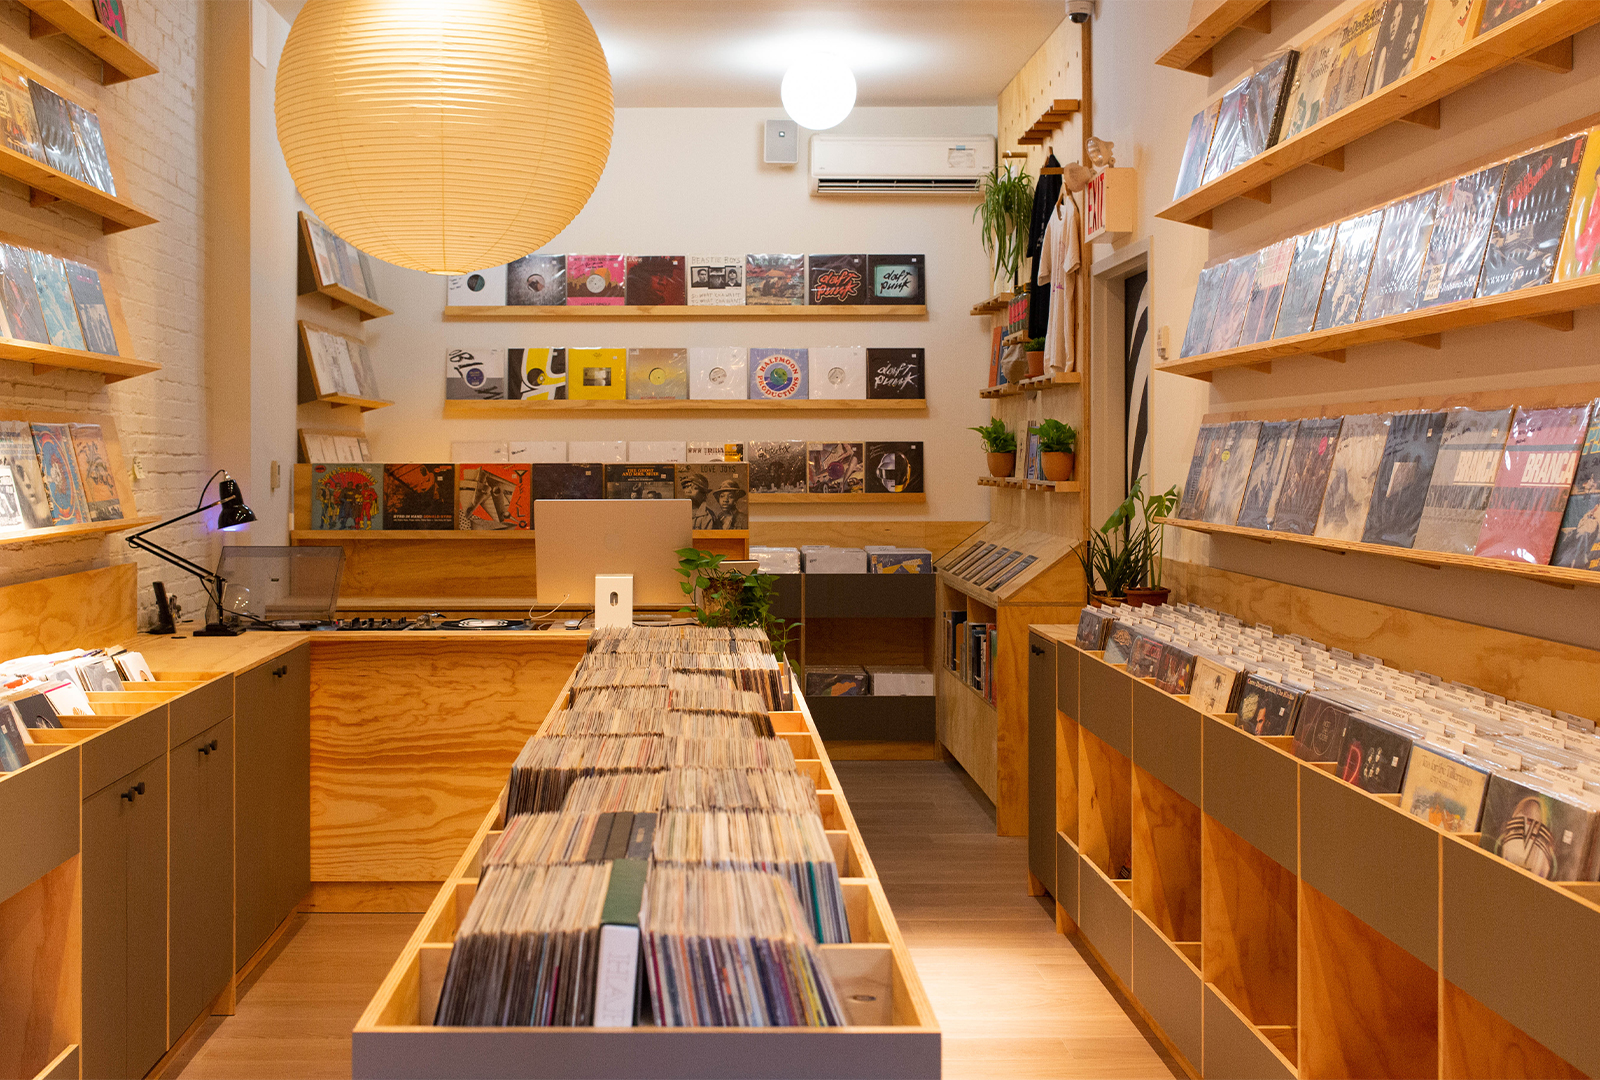 A new record shop is opening in Brooklyn